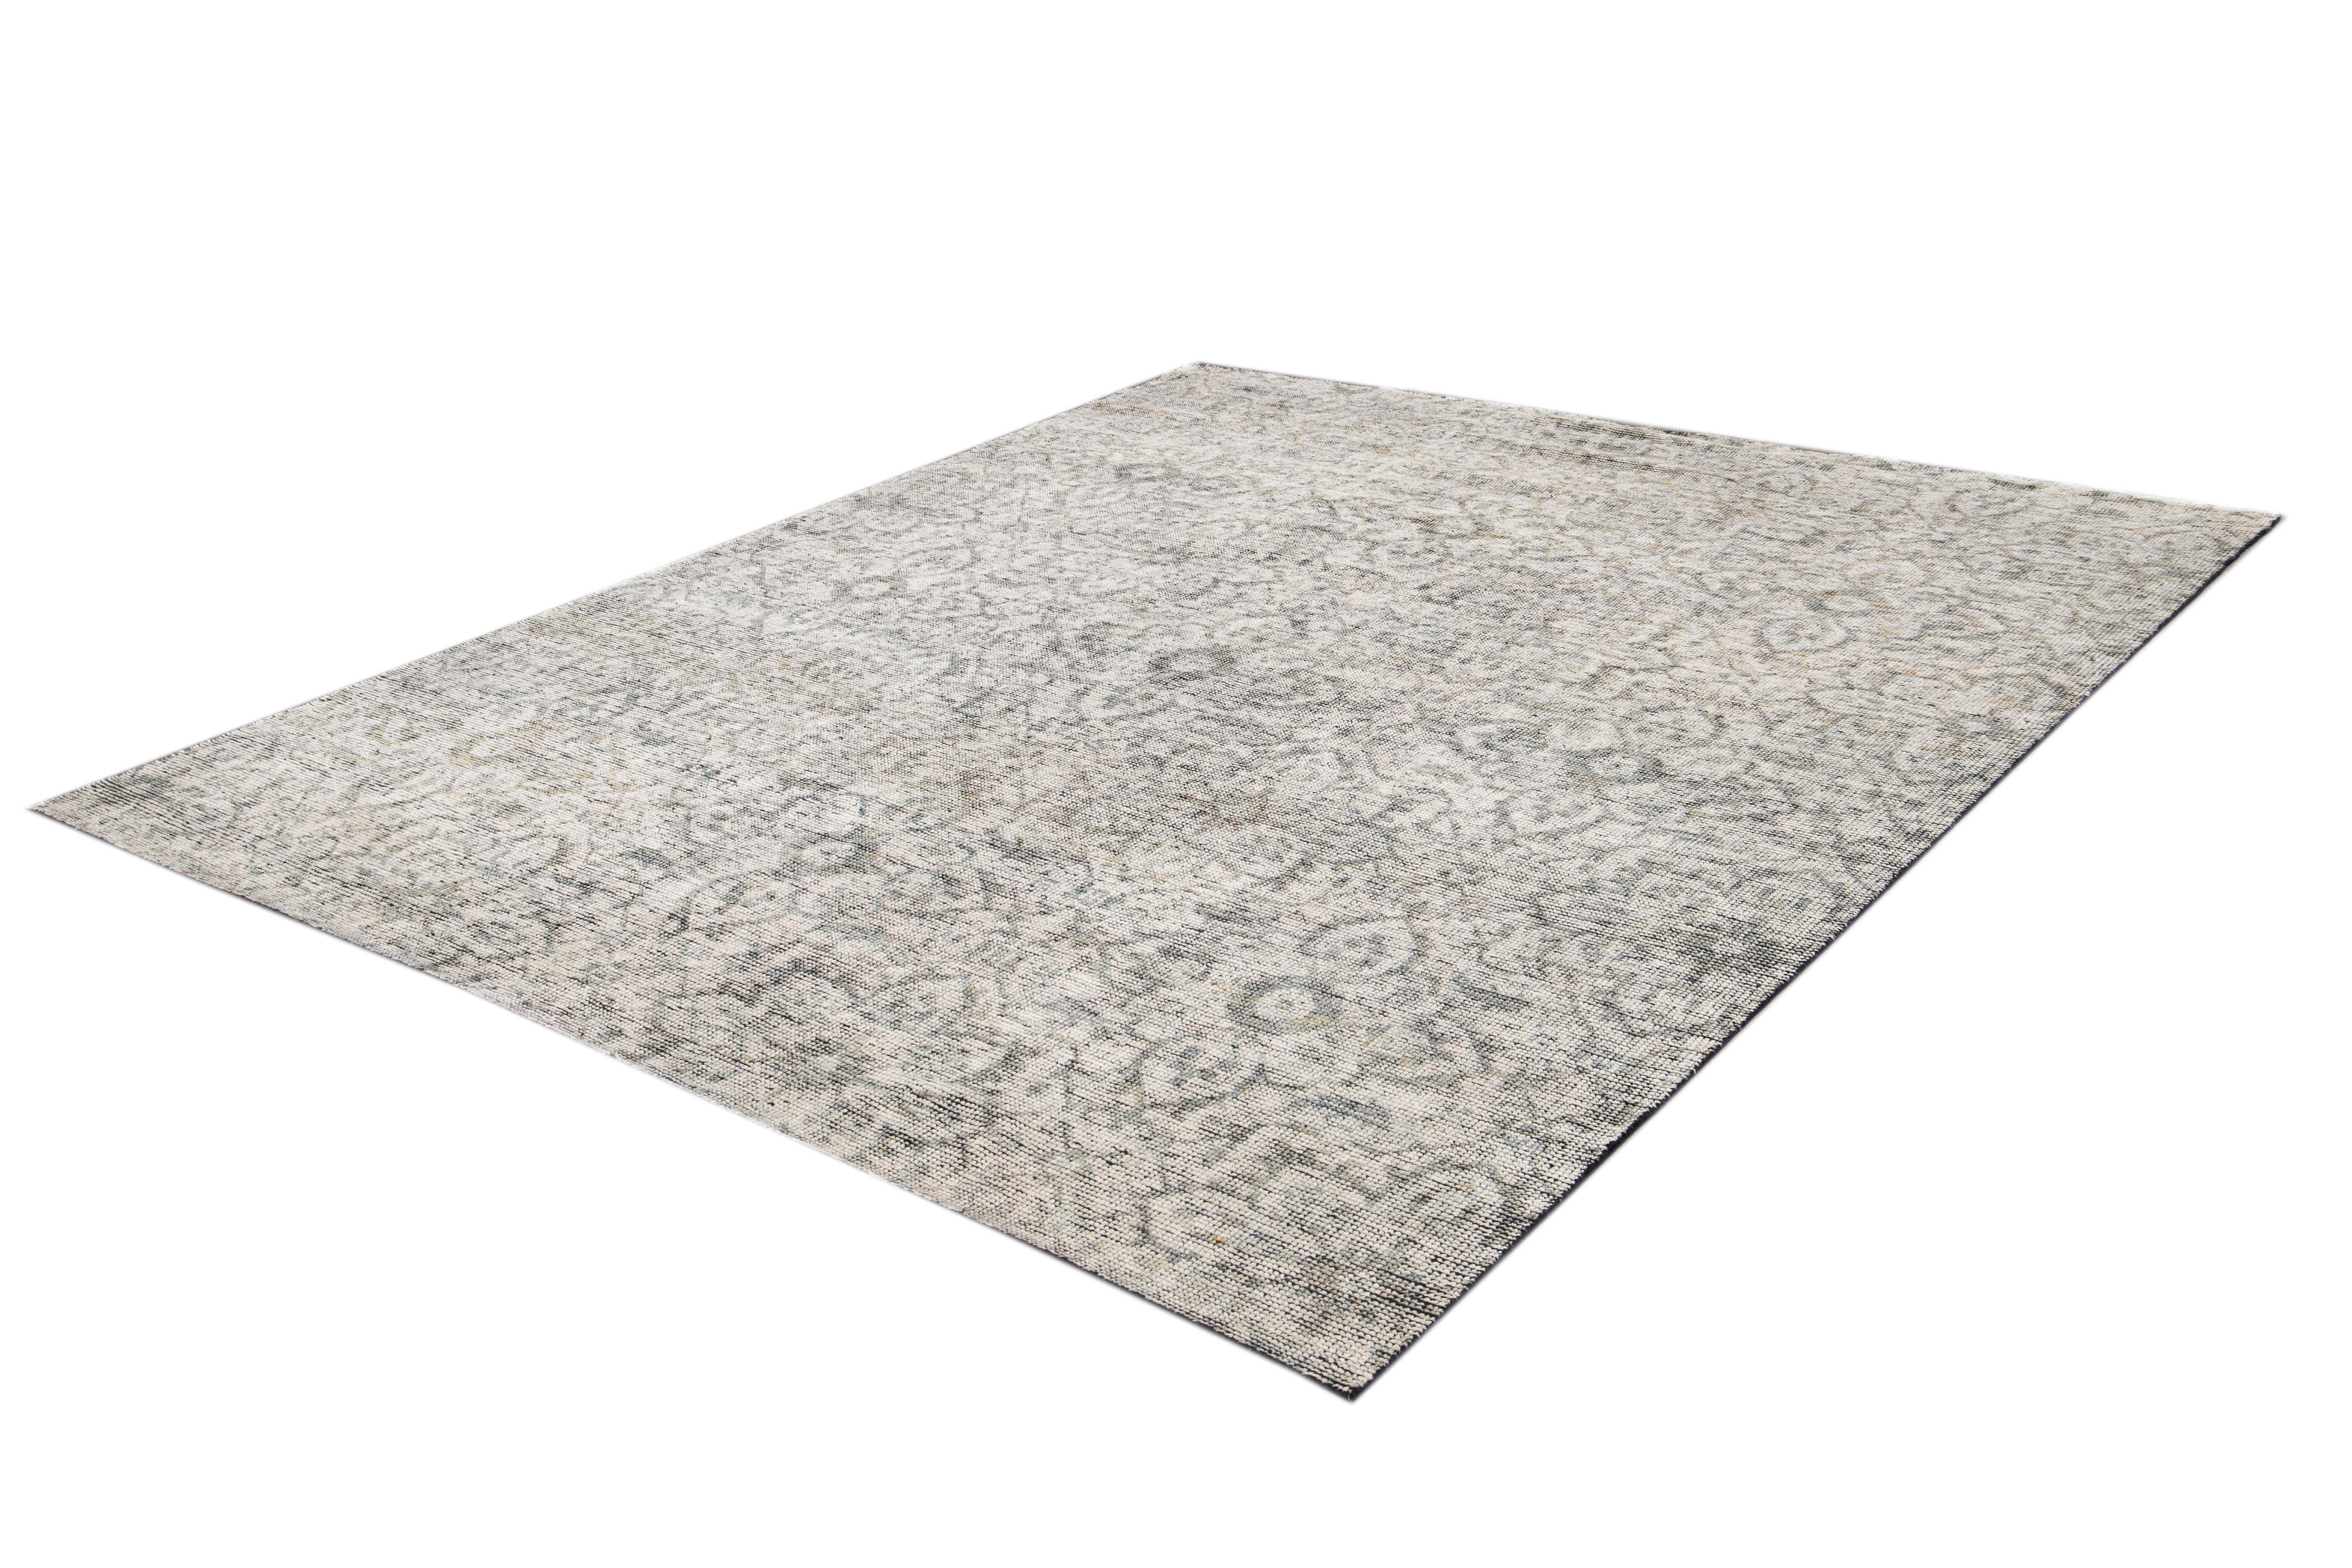 Beautiful Modern Soumak Style Distressed Indian Rug, hand-knotted wool with a gray field tan and light blue accents with an all-over floral medallion design. 

This rug measures 8' 0